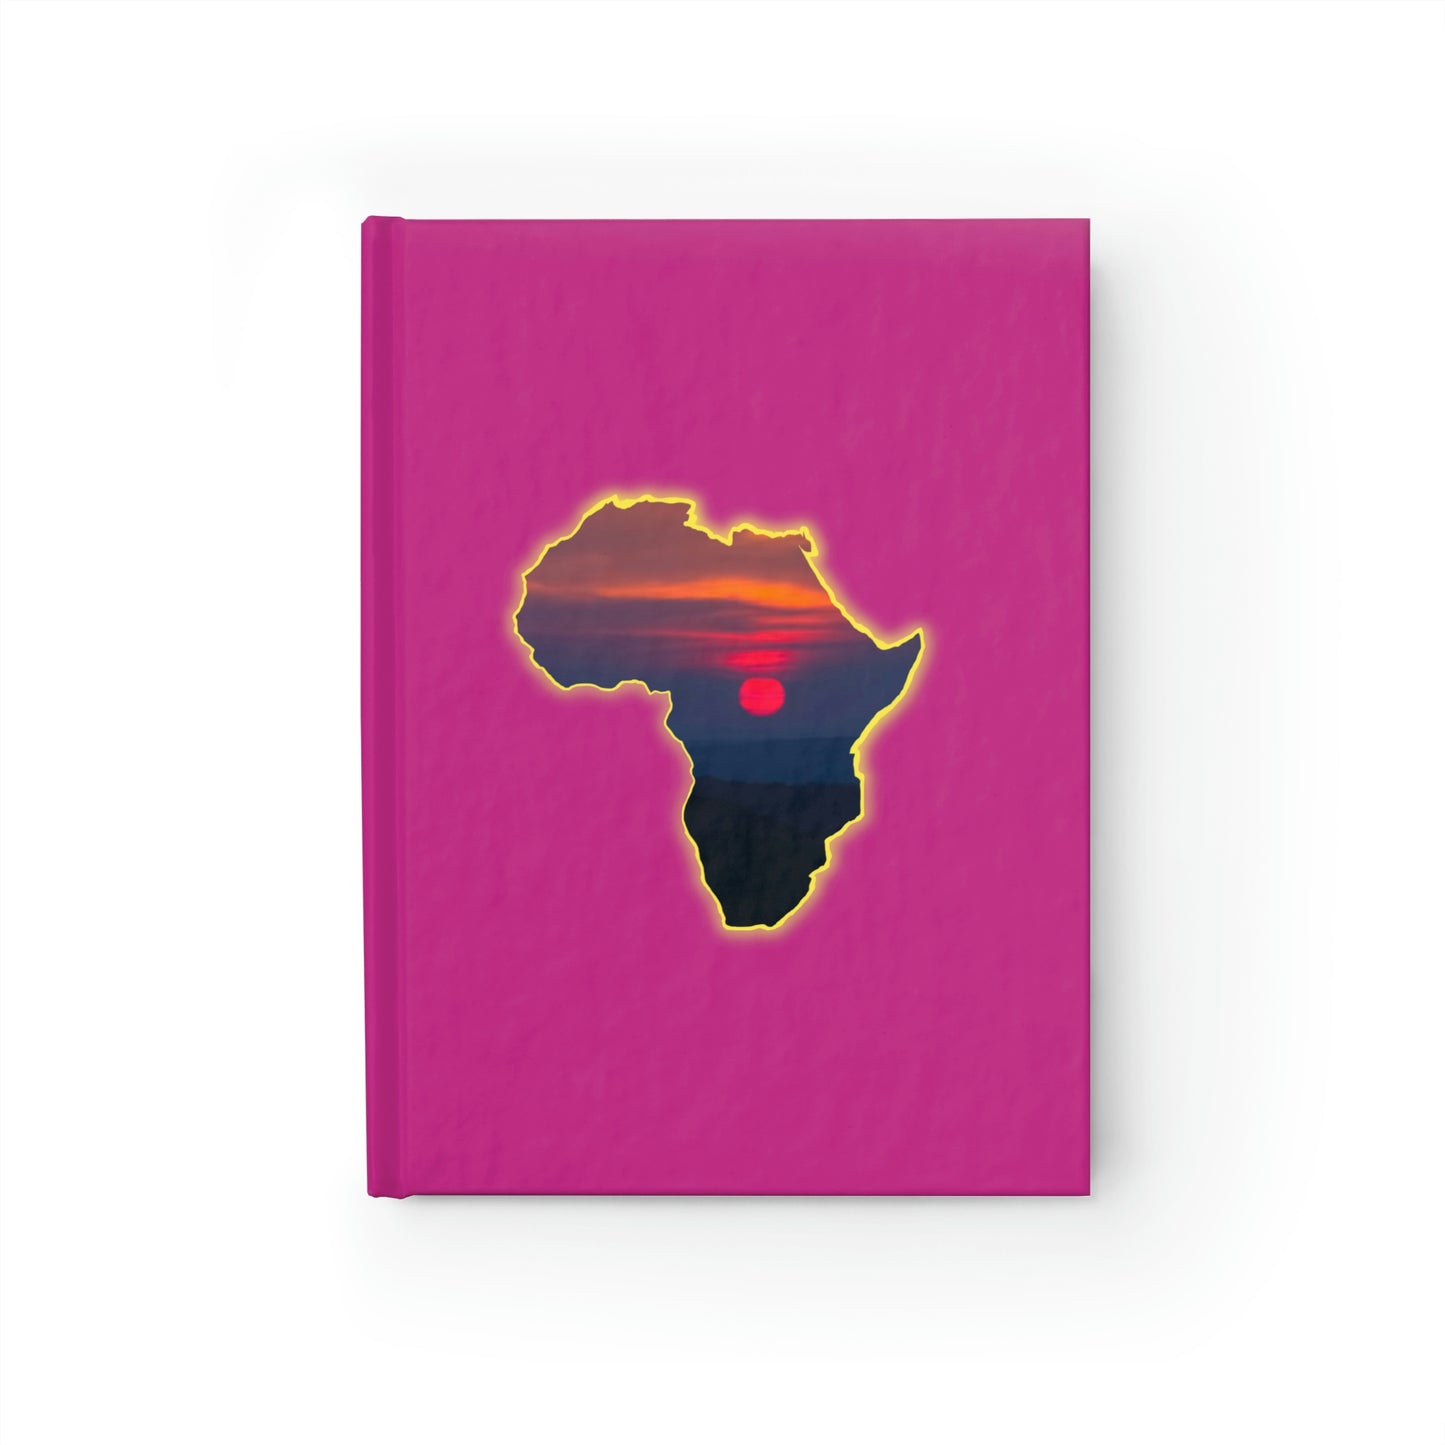 AFRICA Journal Hardcover - Ruled Line - Pink Cover